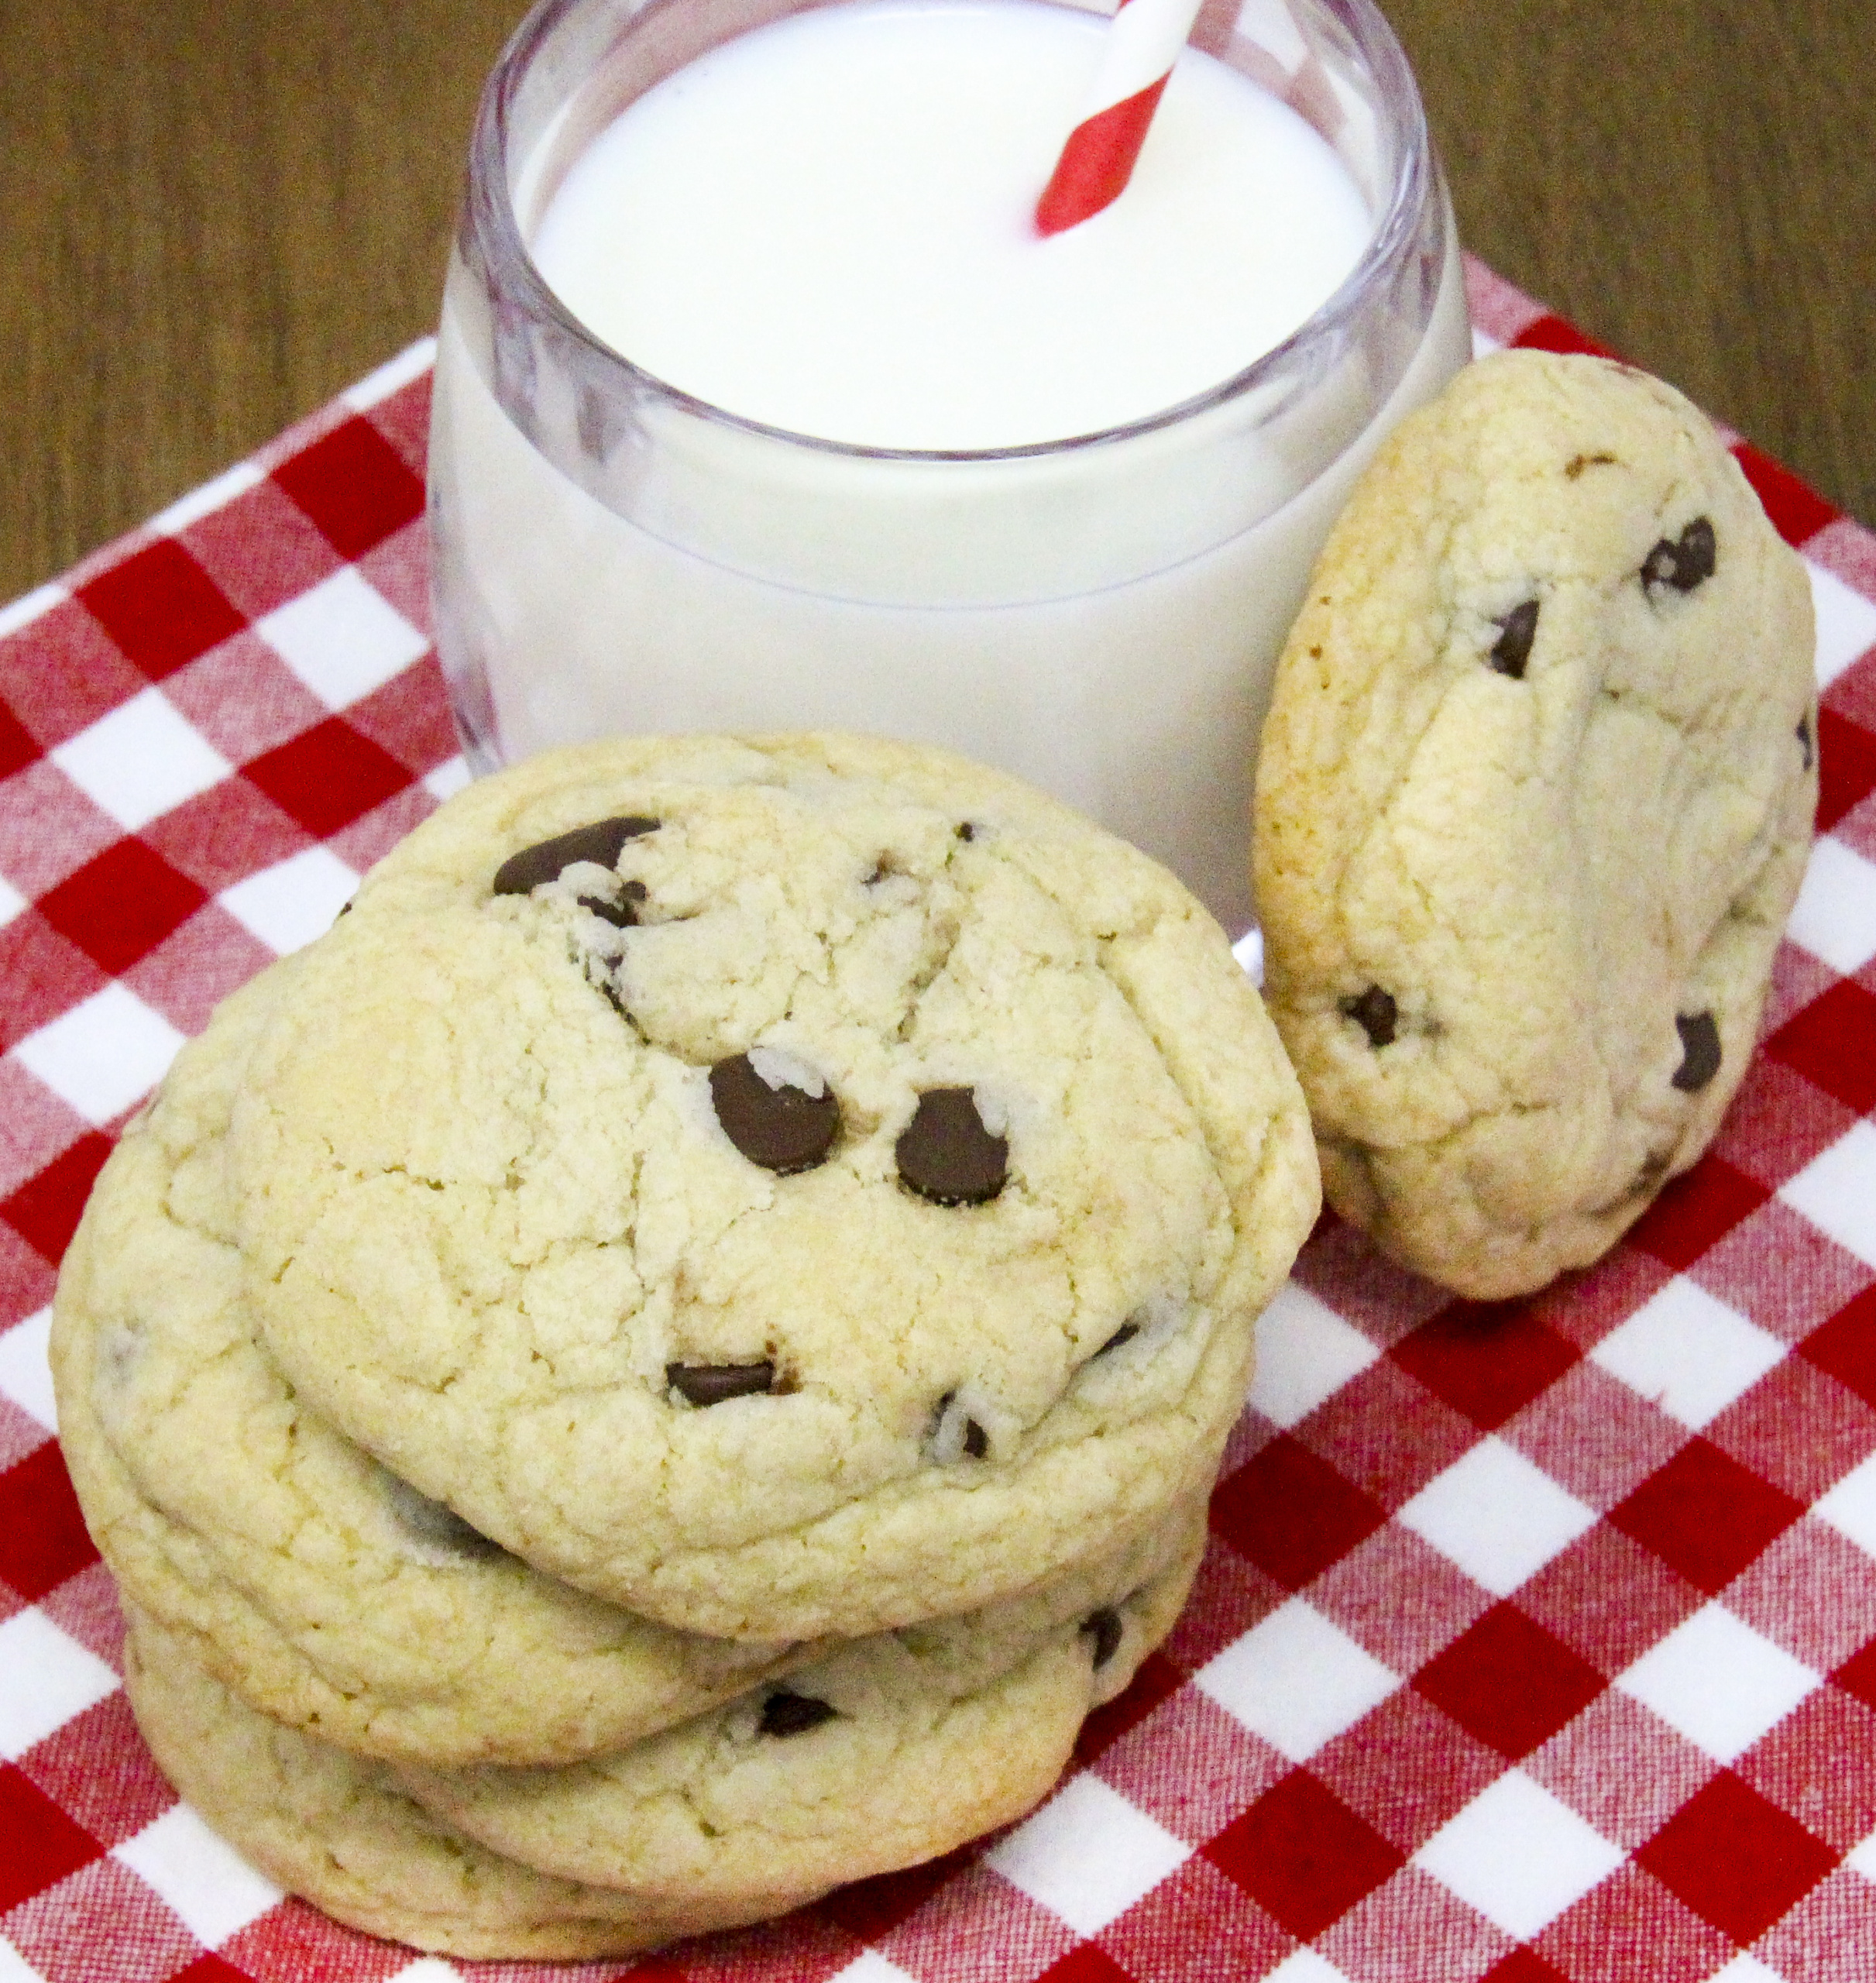 Vicki's Chocolate Chip Cookies are chockfull of just the right amount of chips and are soft and slightly cakelike… and leftovers stay soft! Recipe shared with permission granted by Vicki Delany, author of MURDER IN A TEACUP.